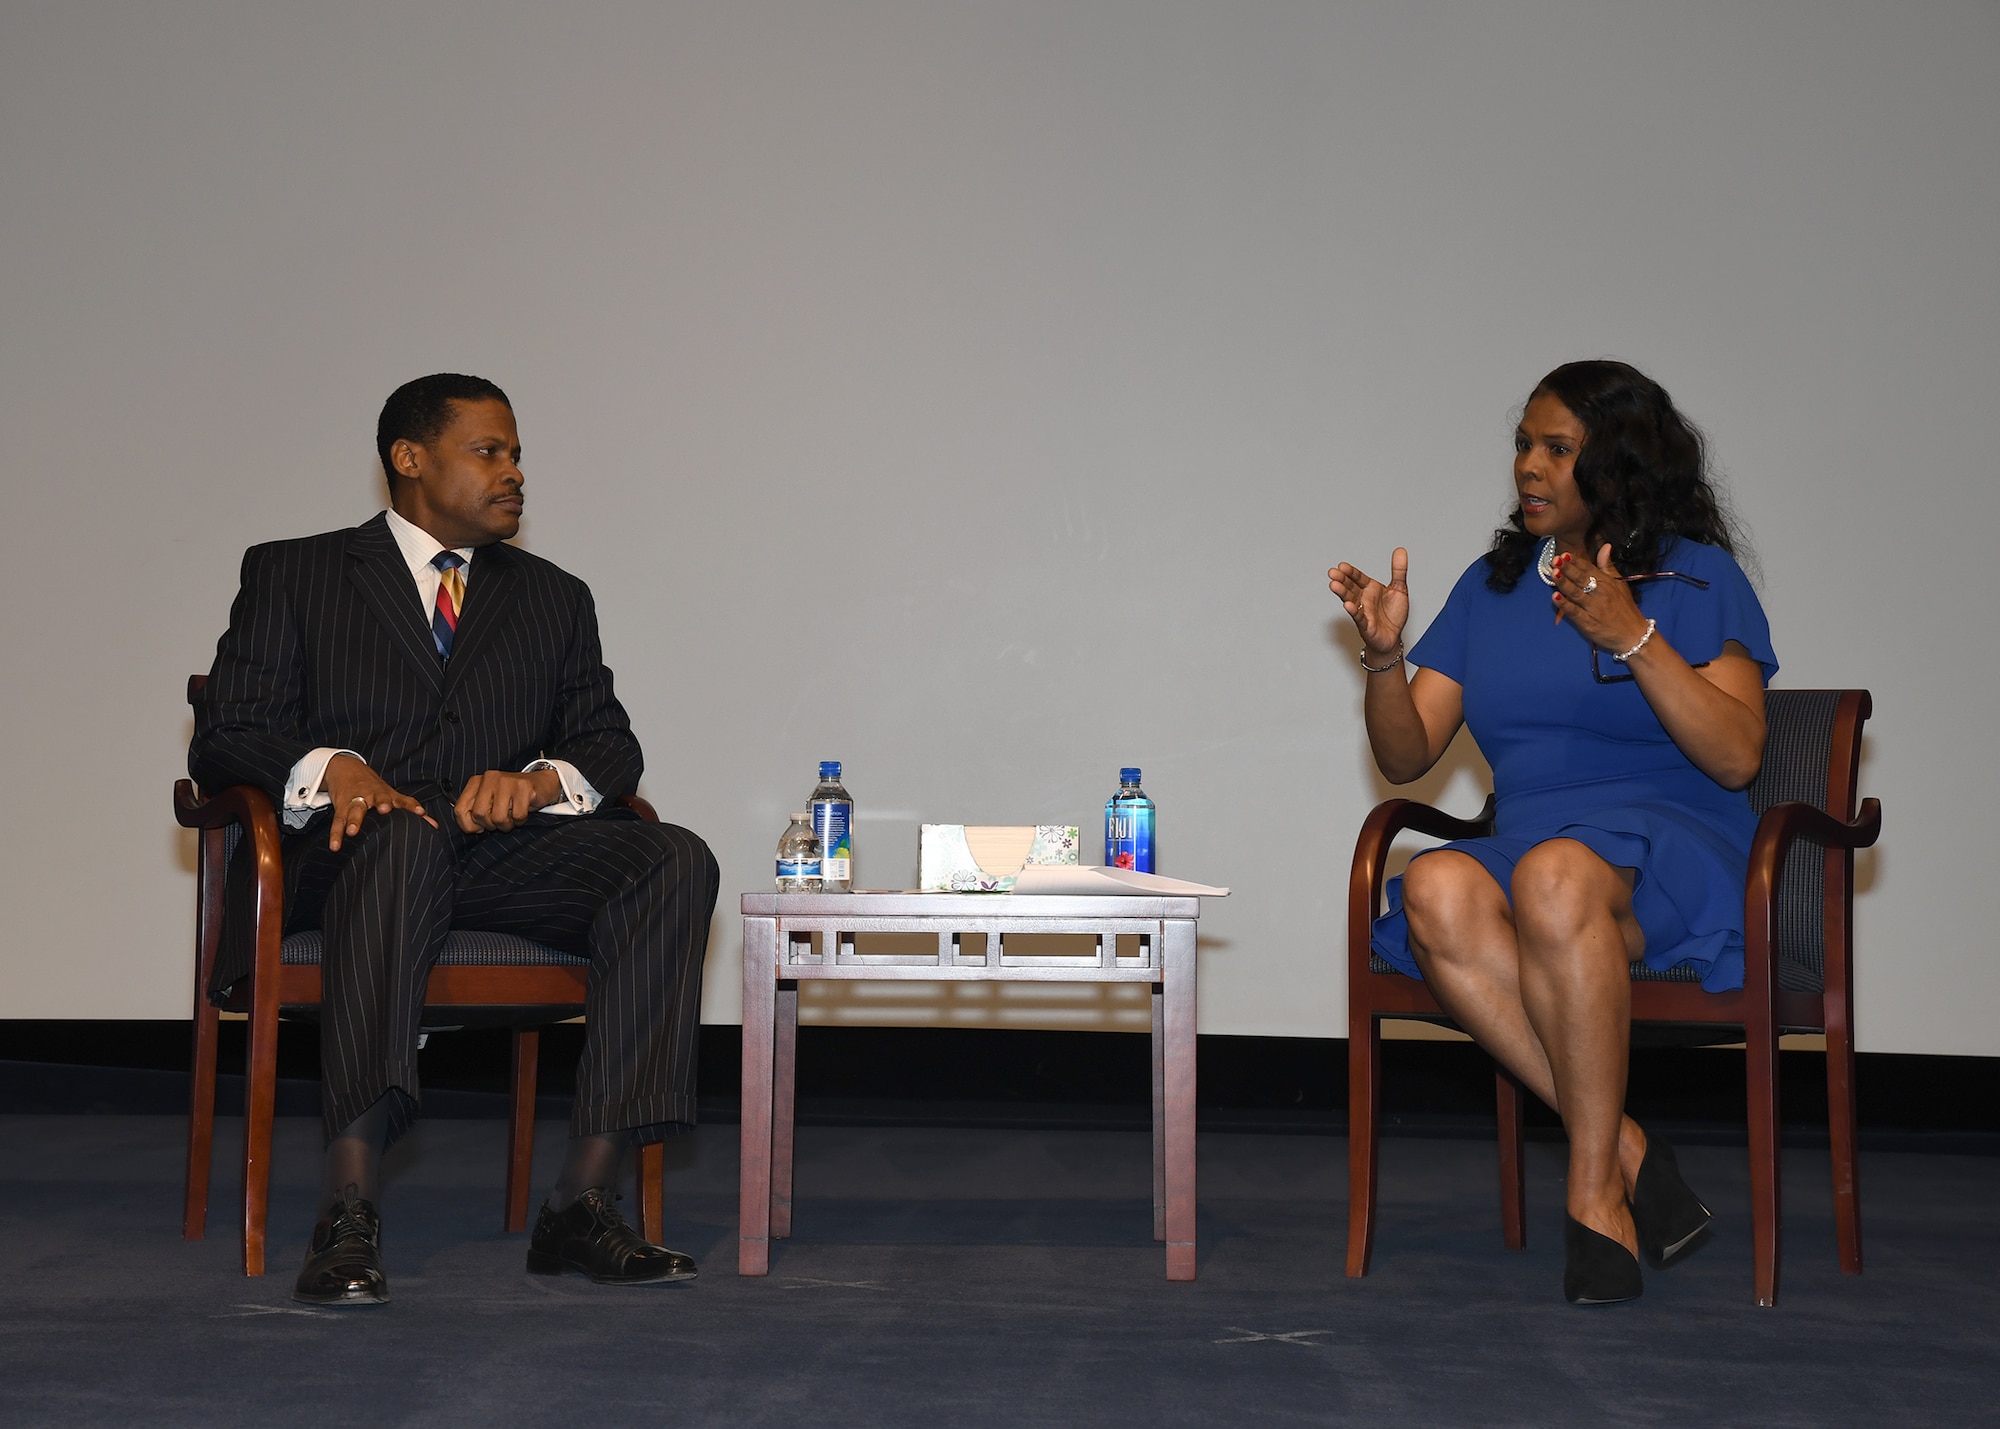 Man, woman seated on stage mid-discussion